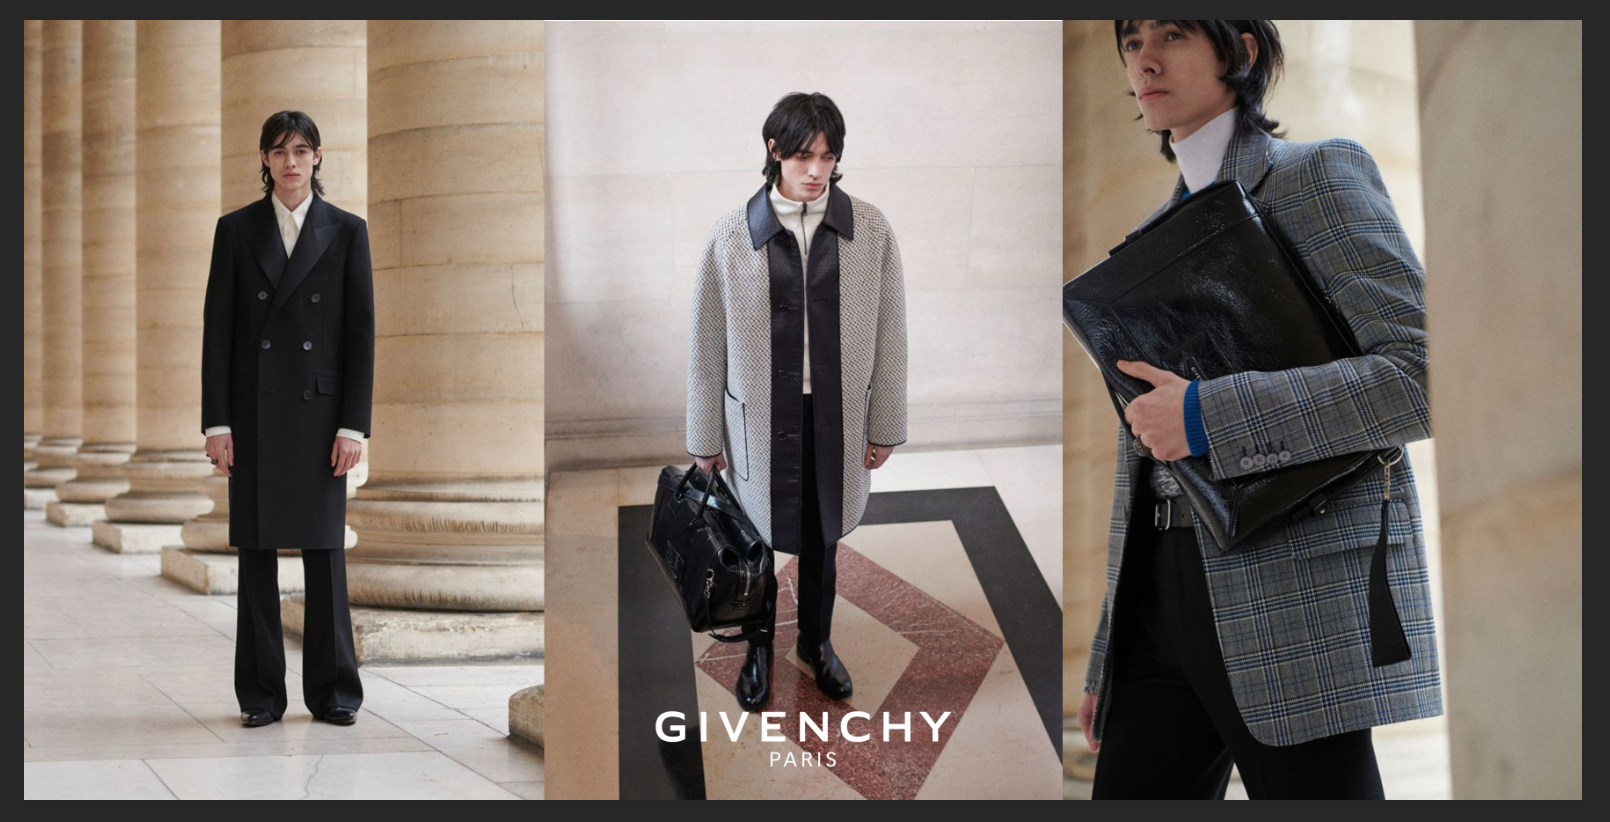 PETRU for Givenchy AW19 collection fh.jpg